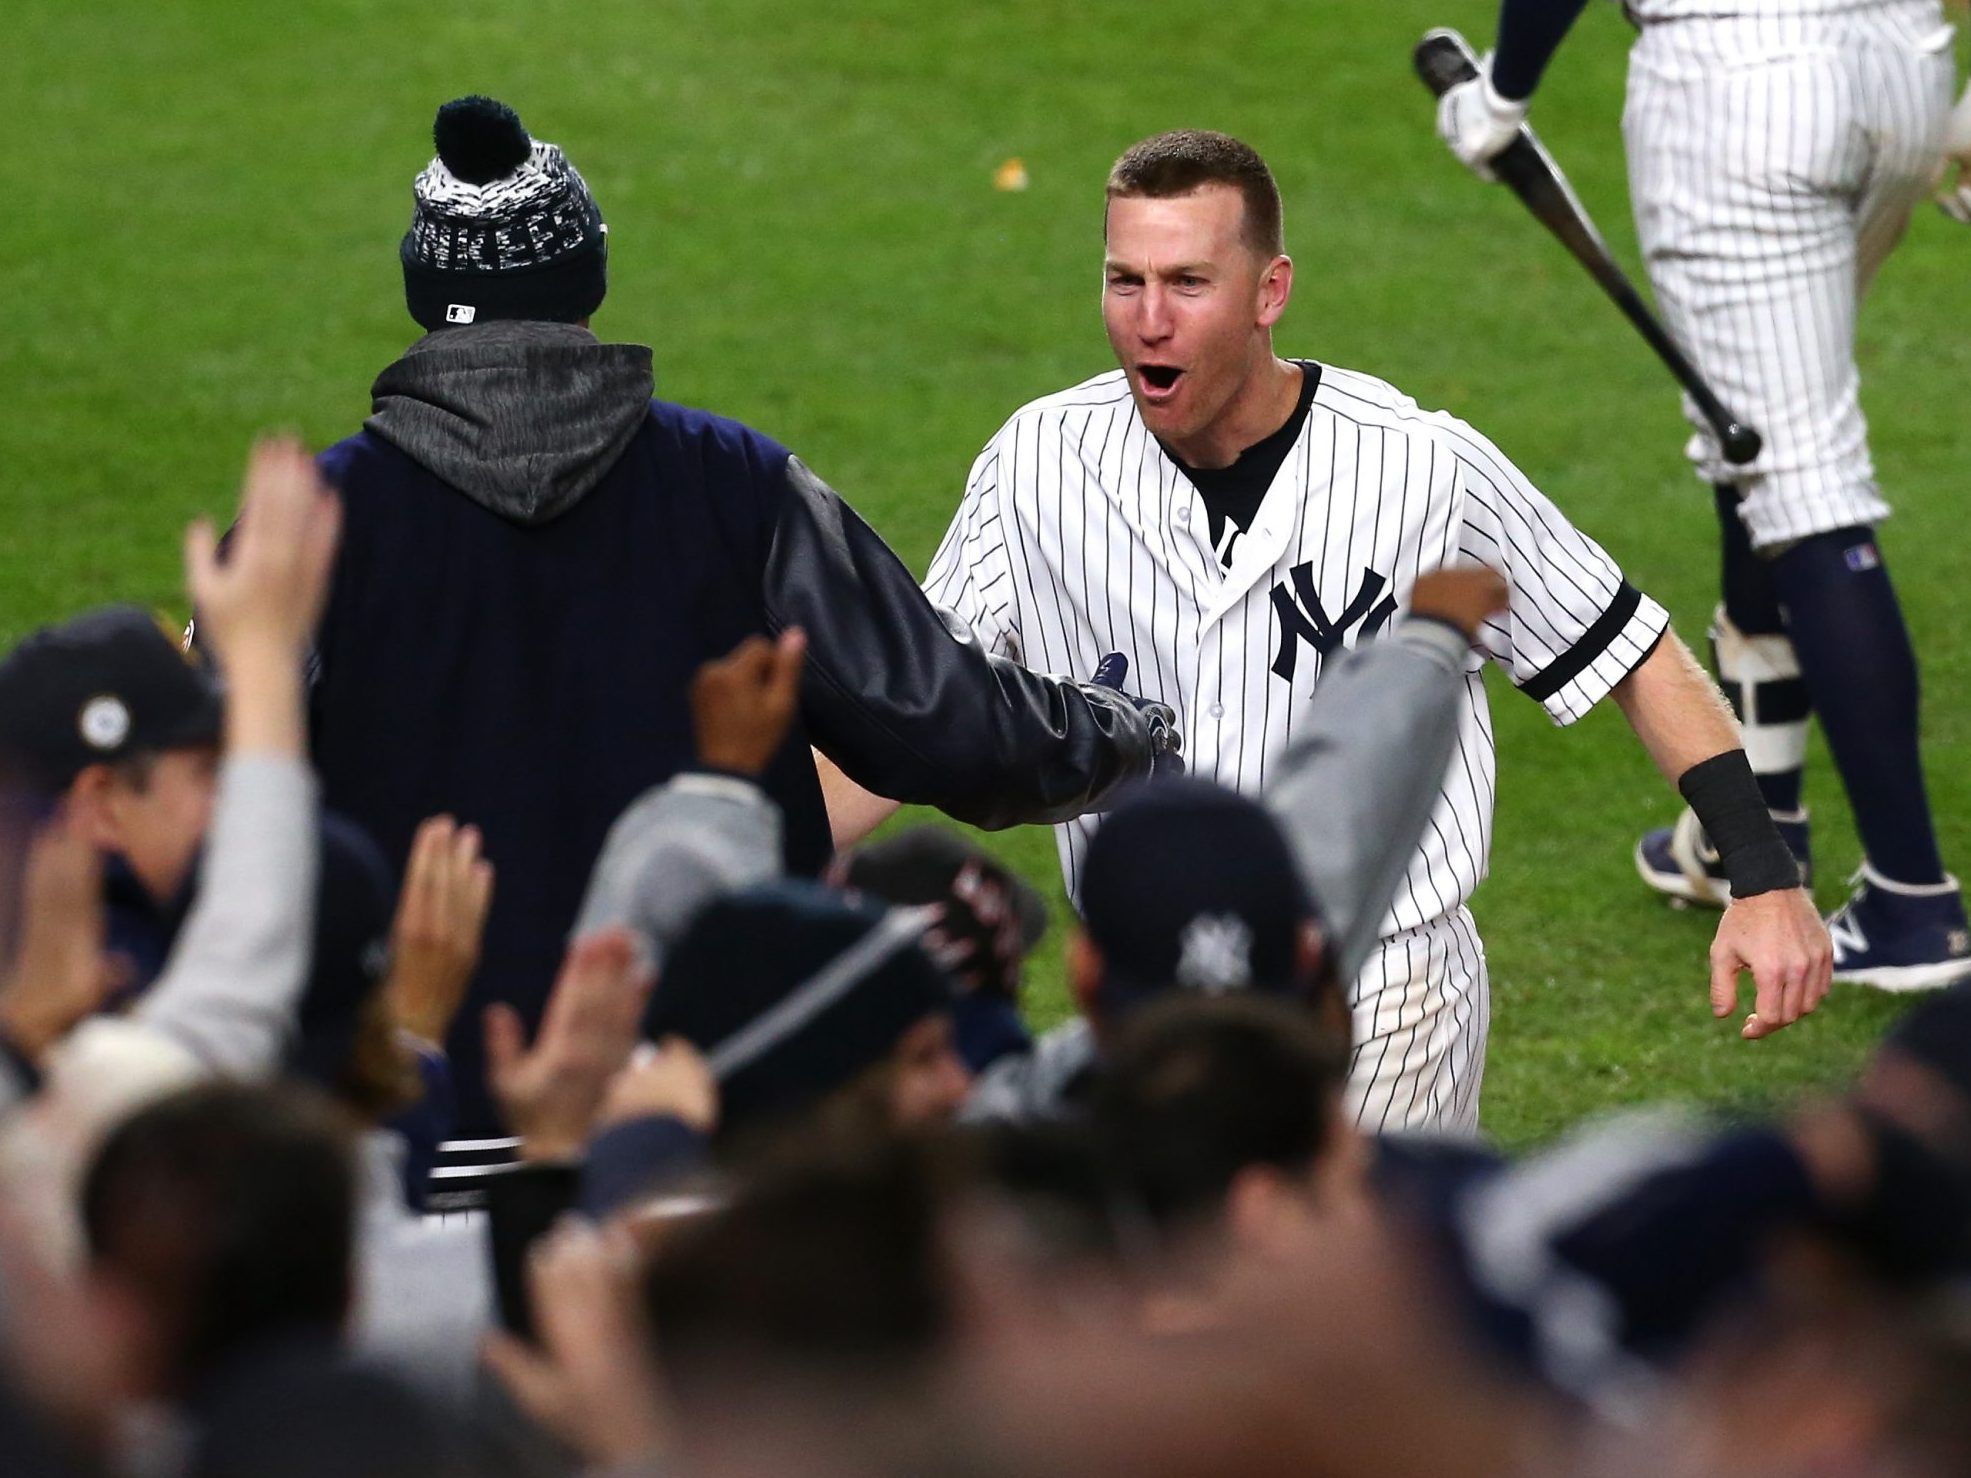 Todd Frazier retiring after 11-year MLB career